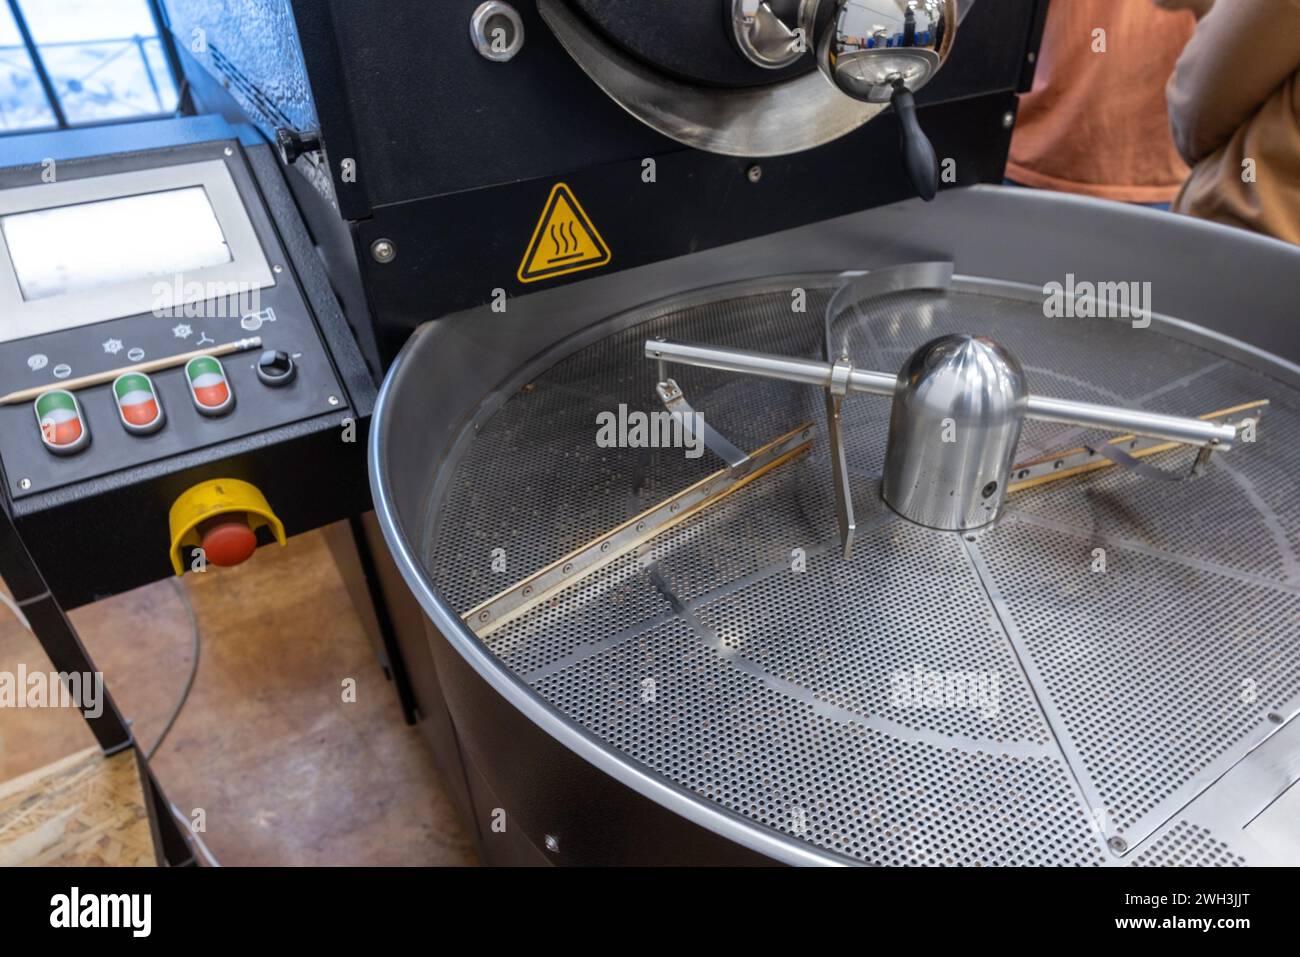 Coffee roaster close up photo, cooling drum and control panel Stock Photo